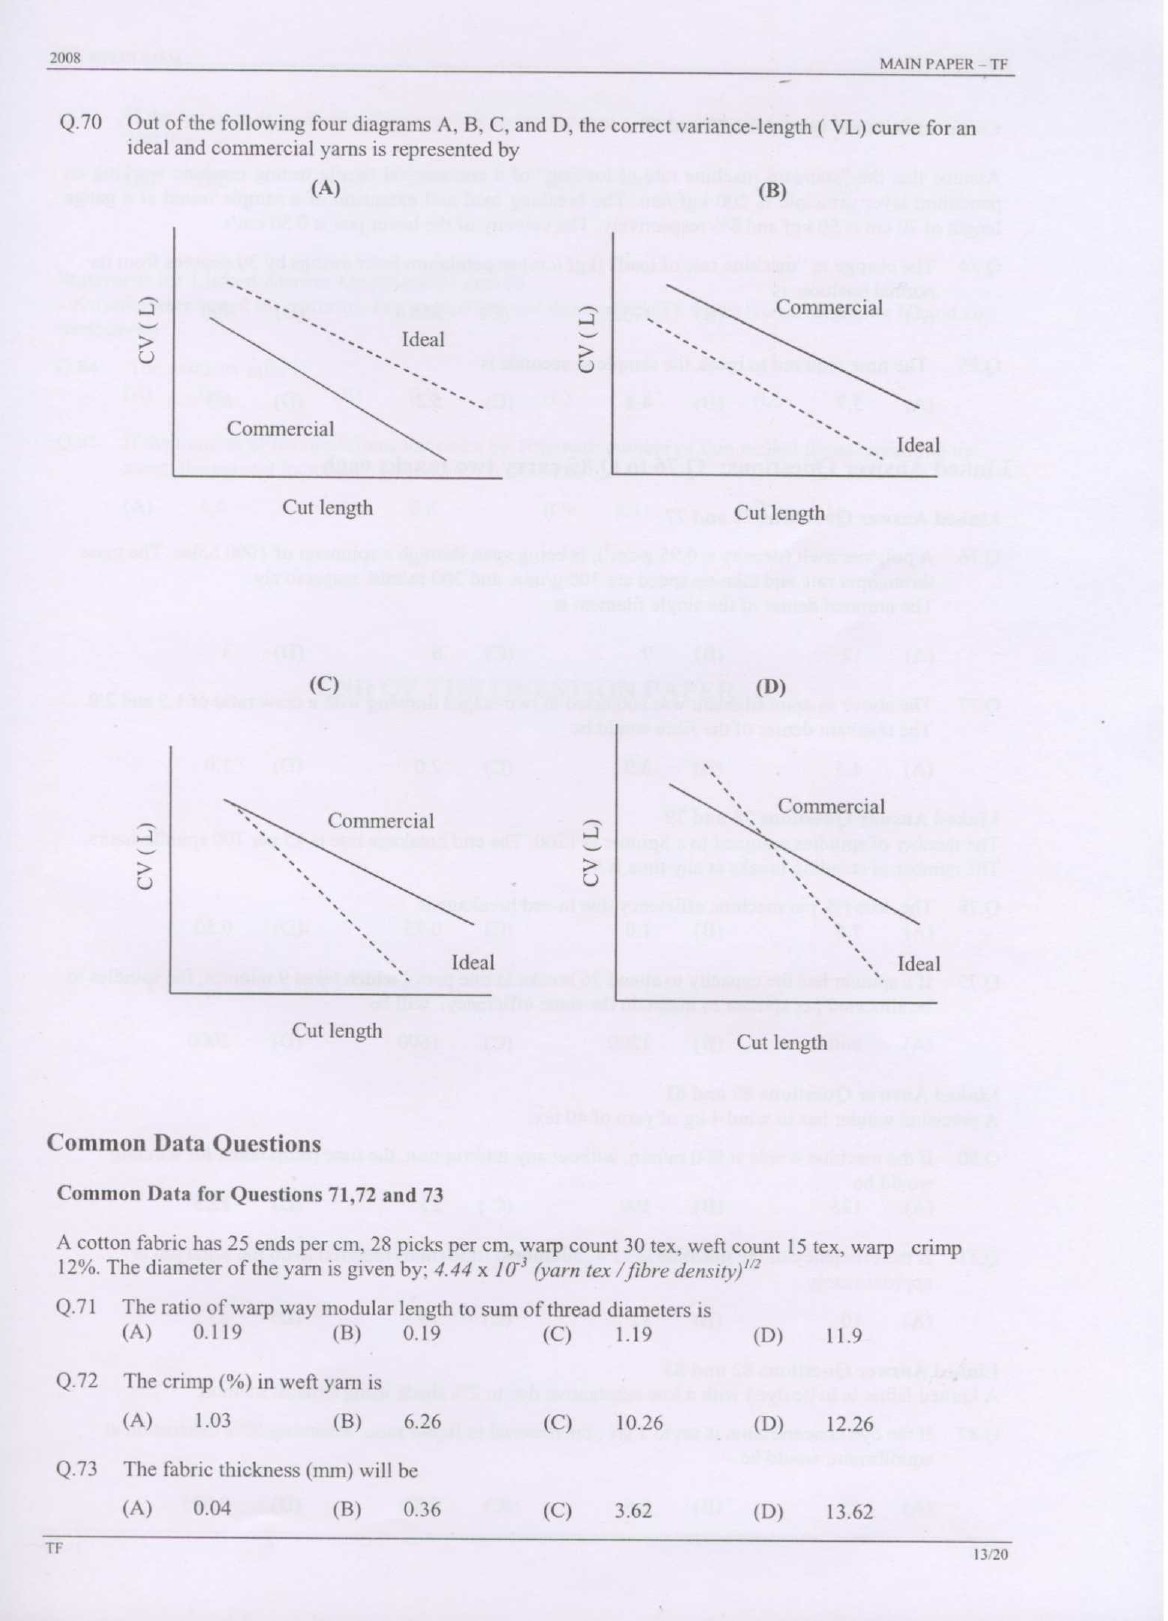 GATE Exam Question Paper 2008 Textile Engineering and Fibre Science 13